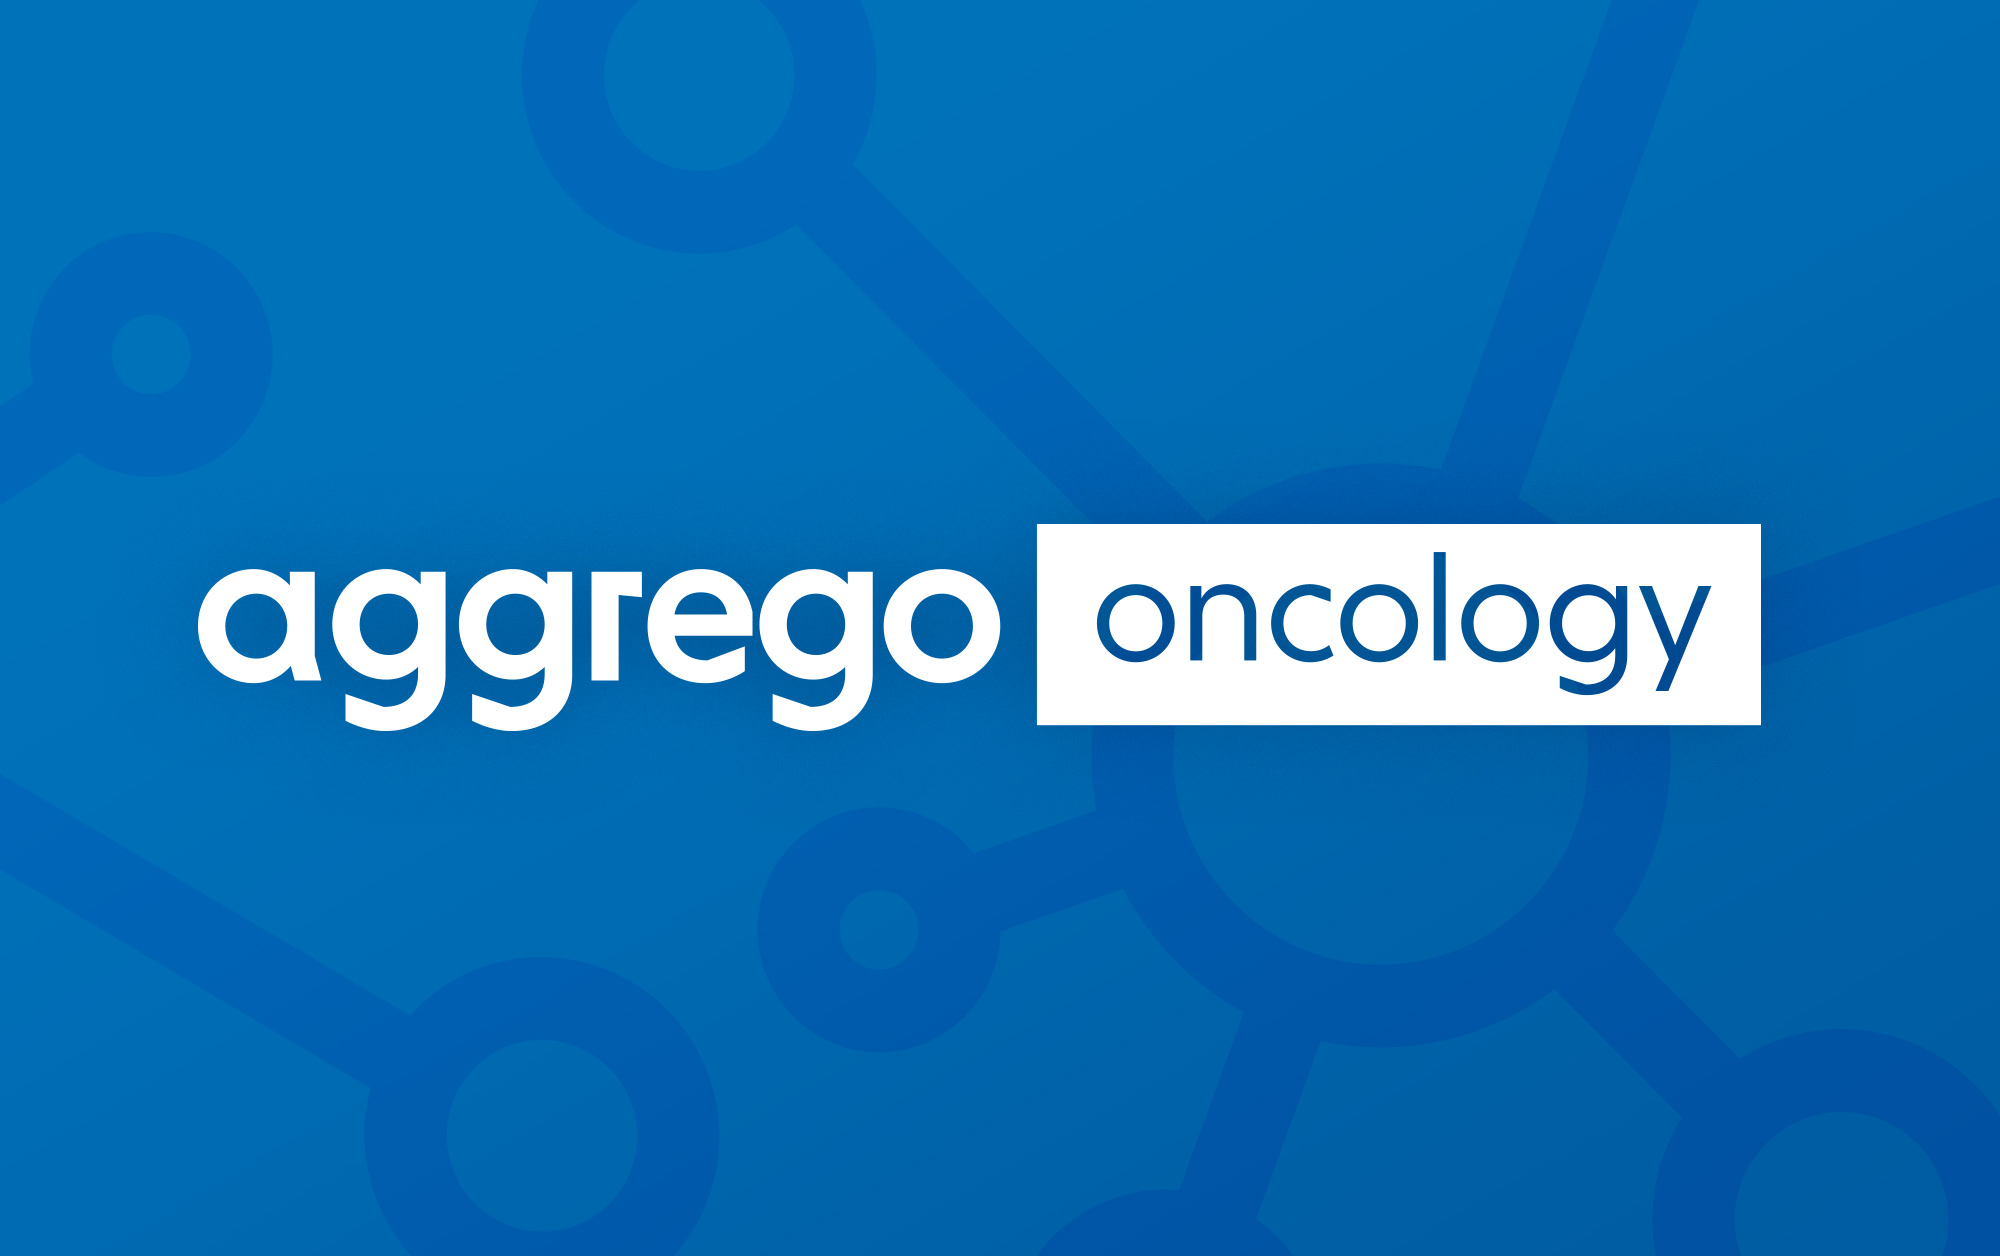 aggrego oncology